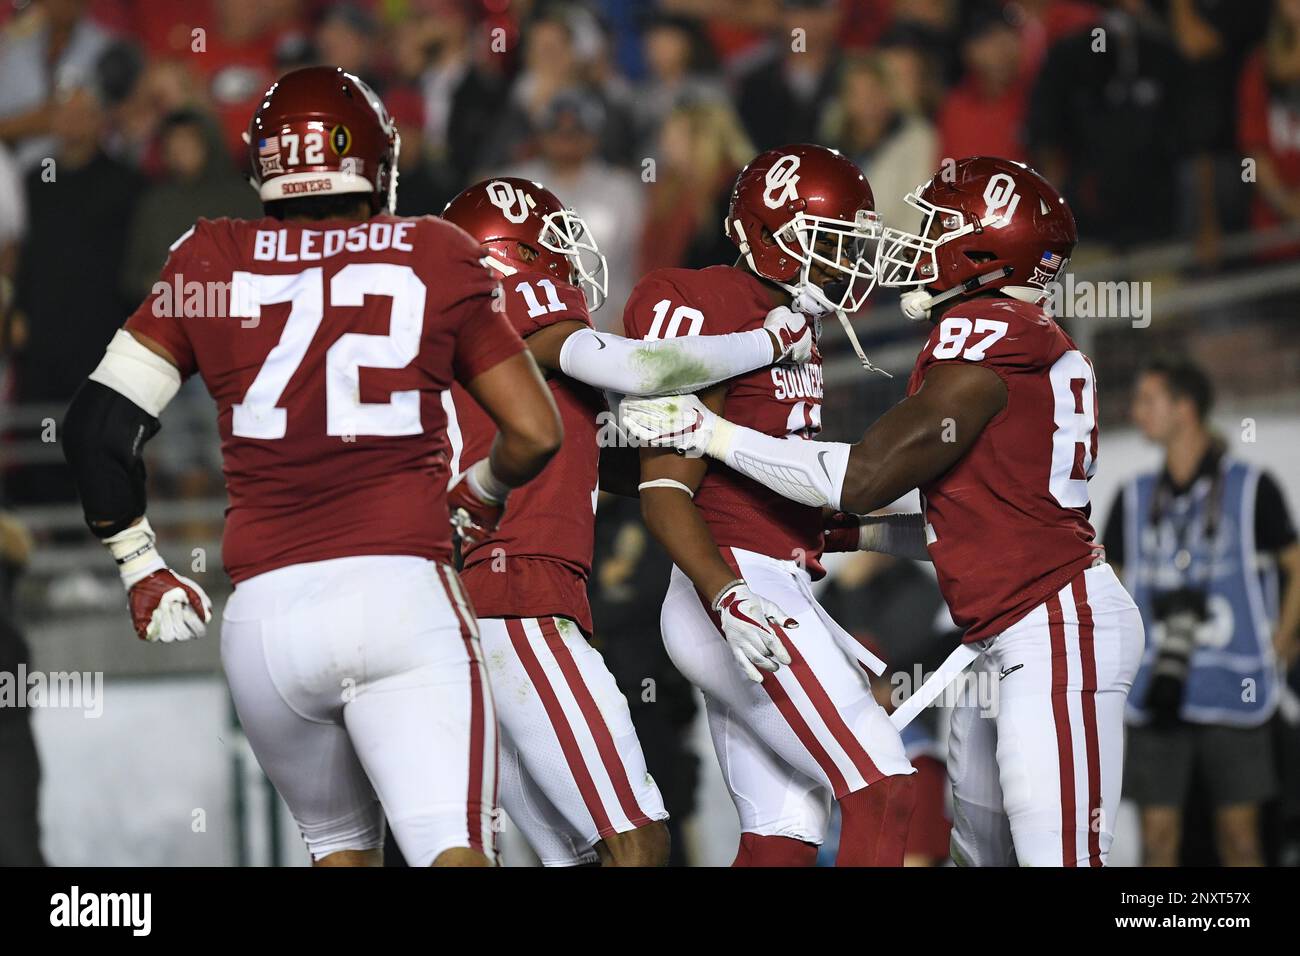 PASADENA, CA - JANUARY 01: DB Steven Parker (10) of the Oklahoma Sooners  celebrates with teammates after a 46 Yard Fumble Return a touchdown to put  the Sooners up 45-38 in the